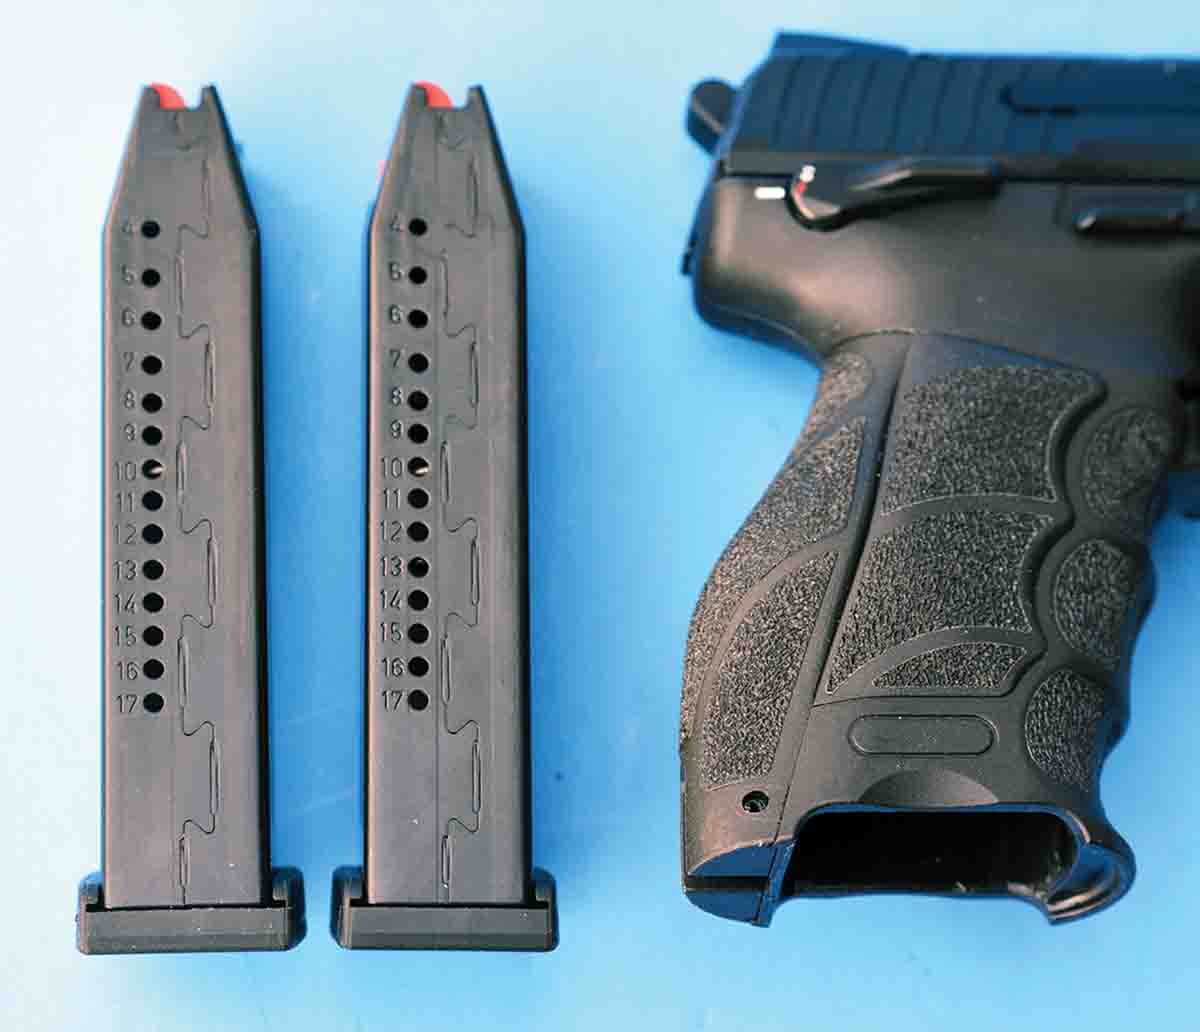 The HK P30 features 17-round, steel magazines.